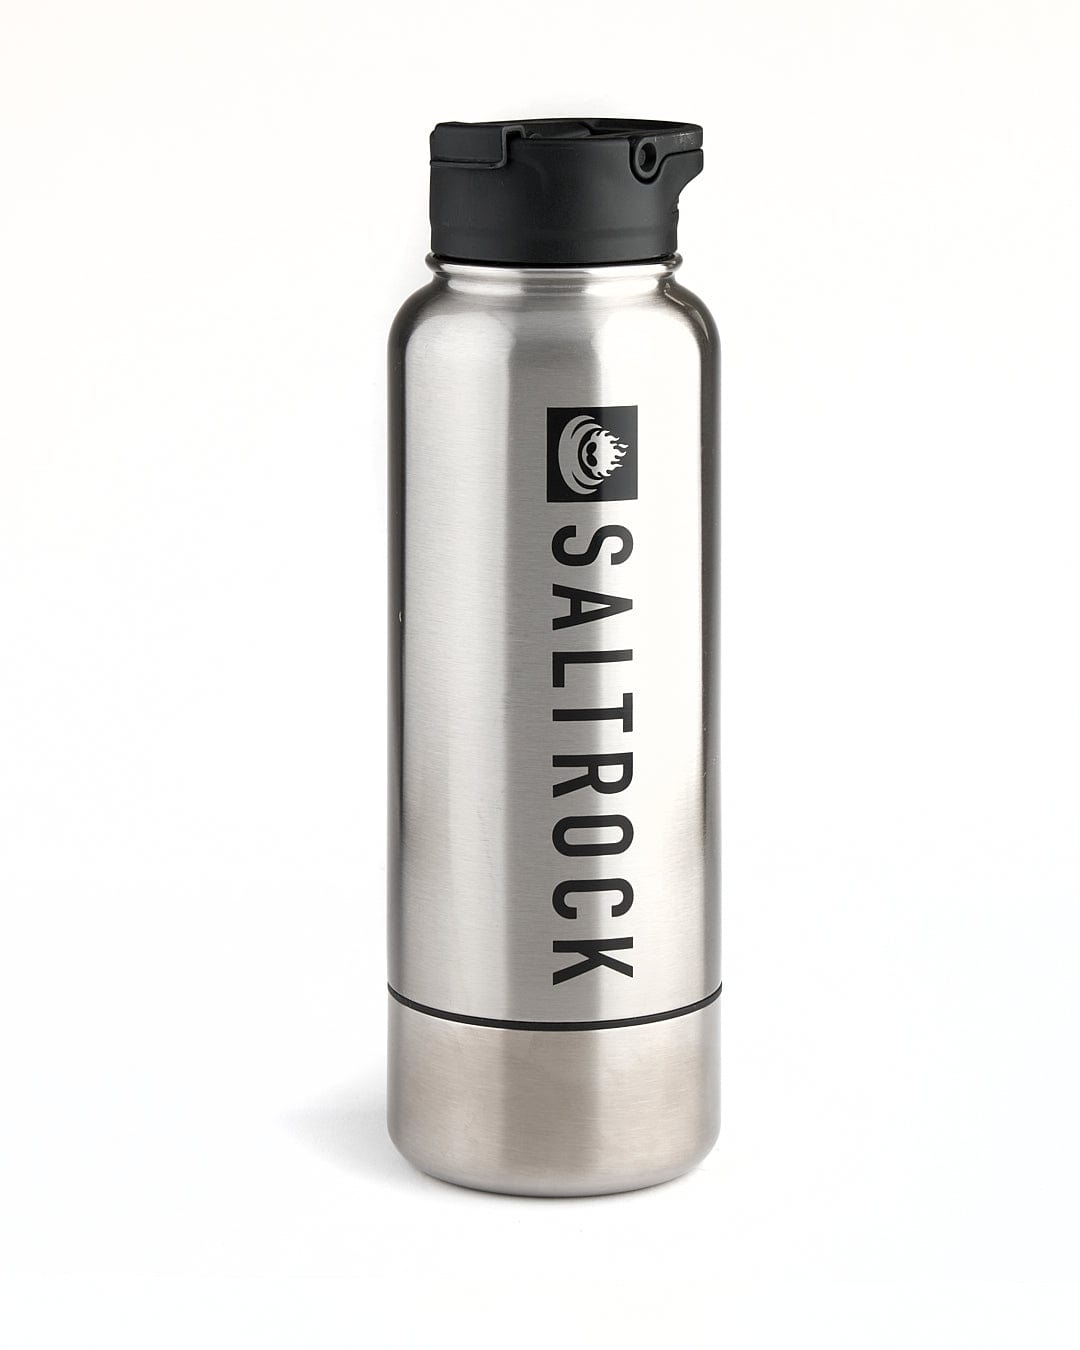 A Stash stainless steel water bottle with the word Saltrock on it.